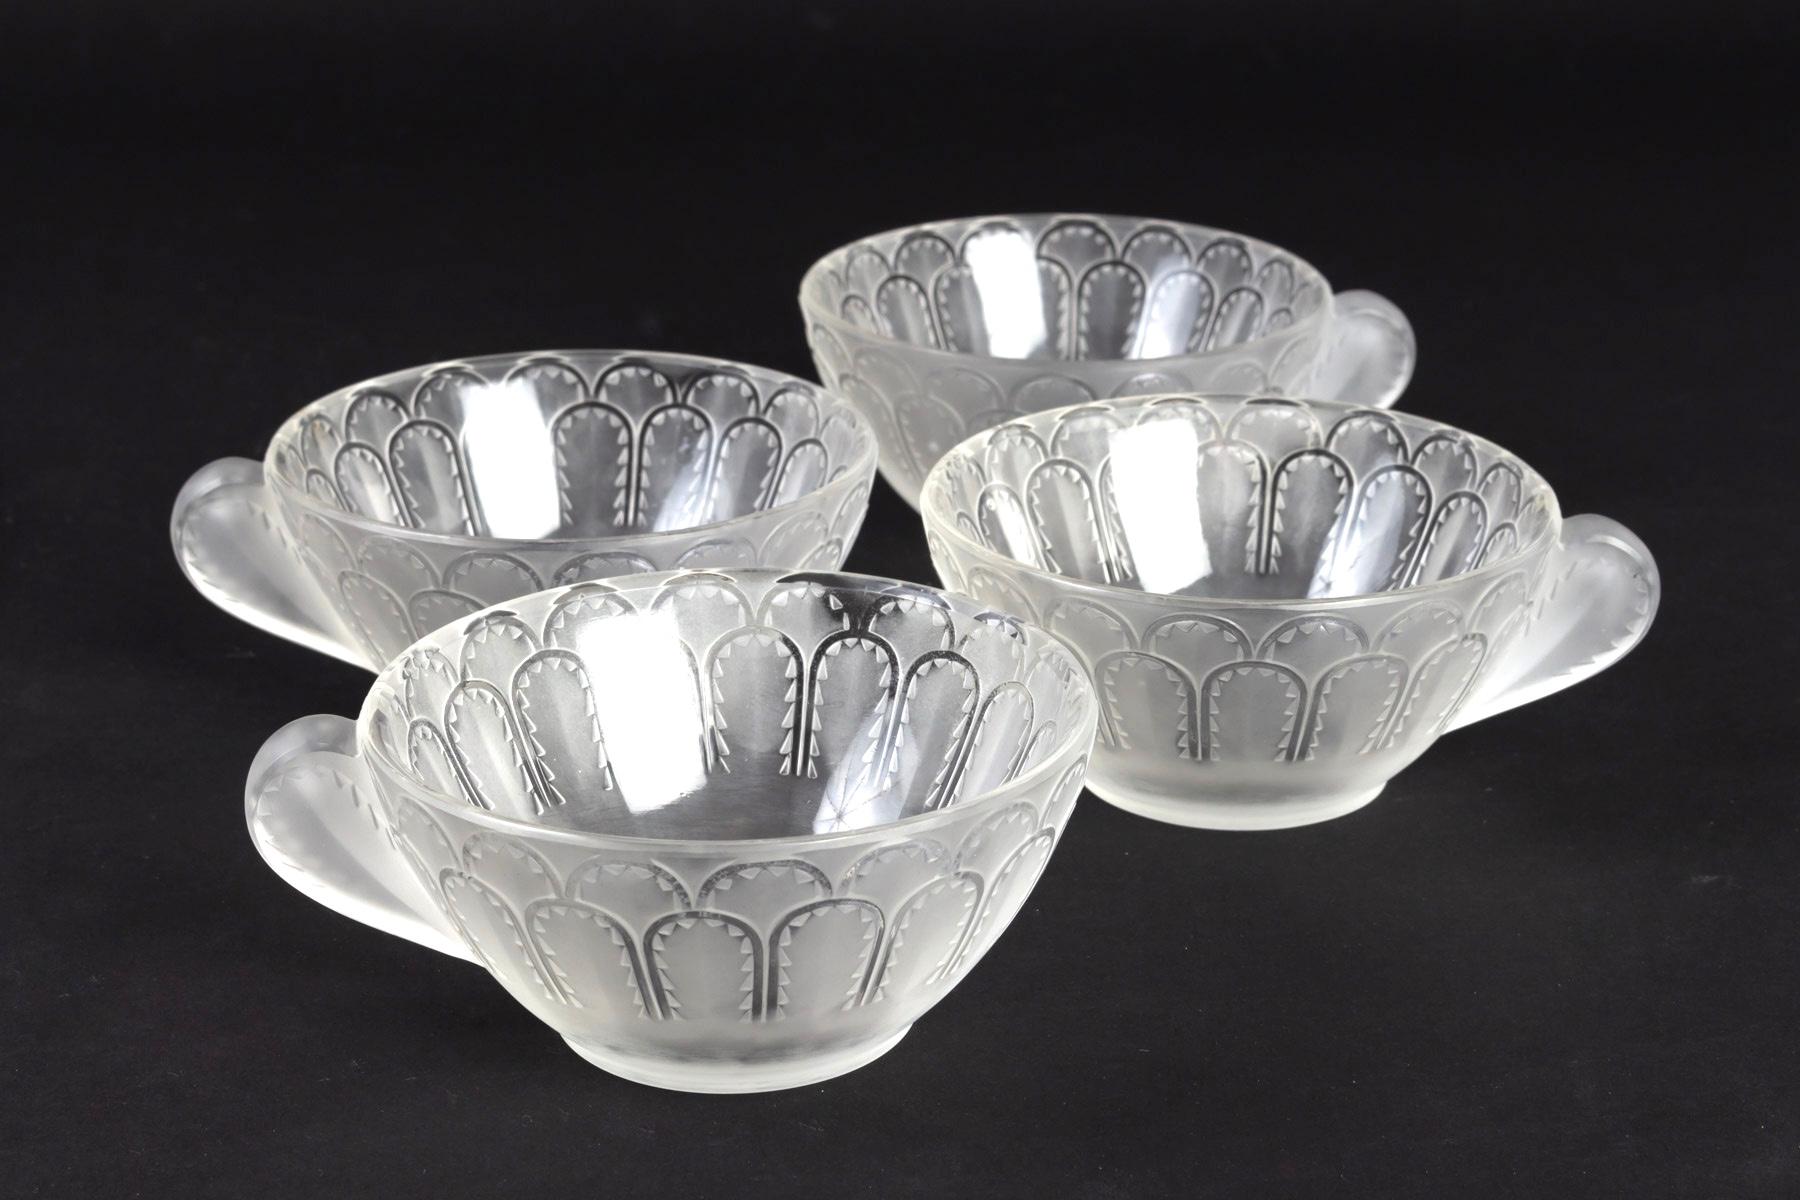 French 1931 René Lalique Jaffa Set of 9 Ice-Cream Cups and Tray Frosted Glass